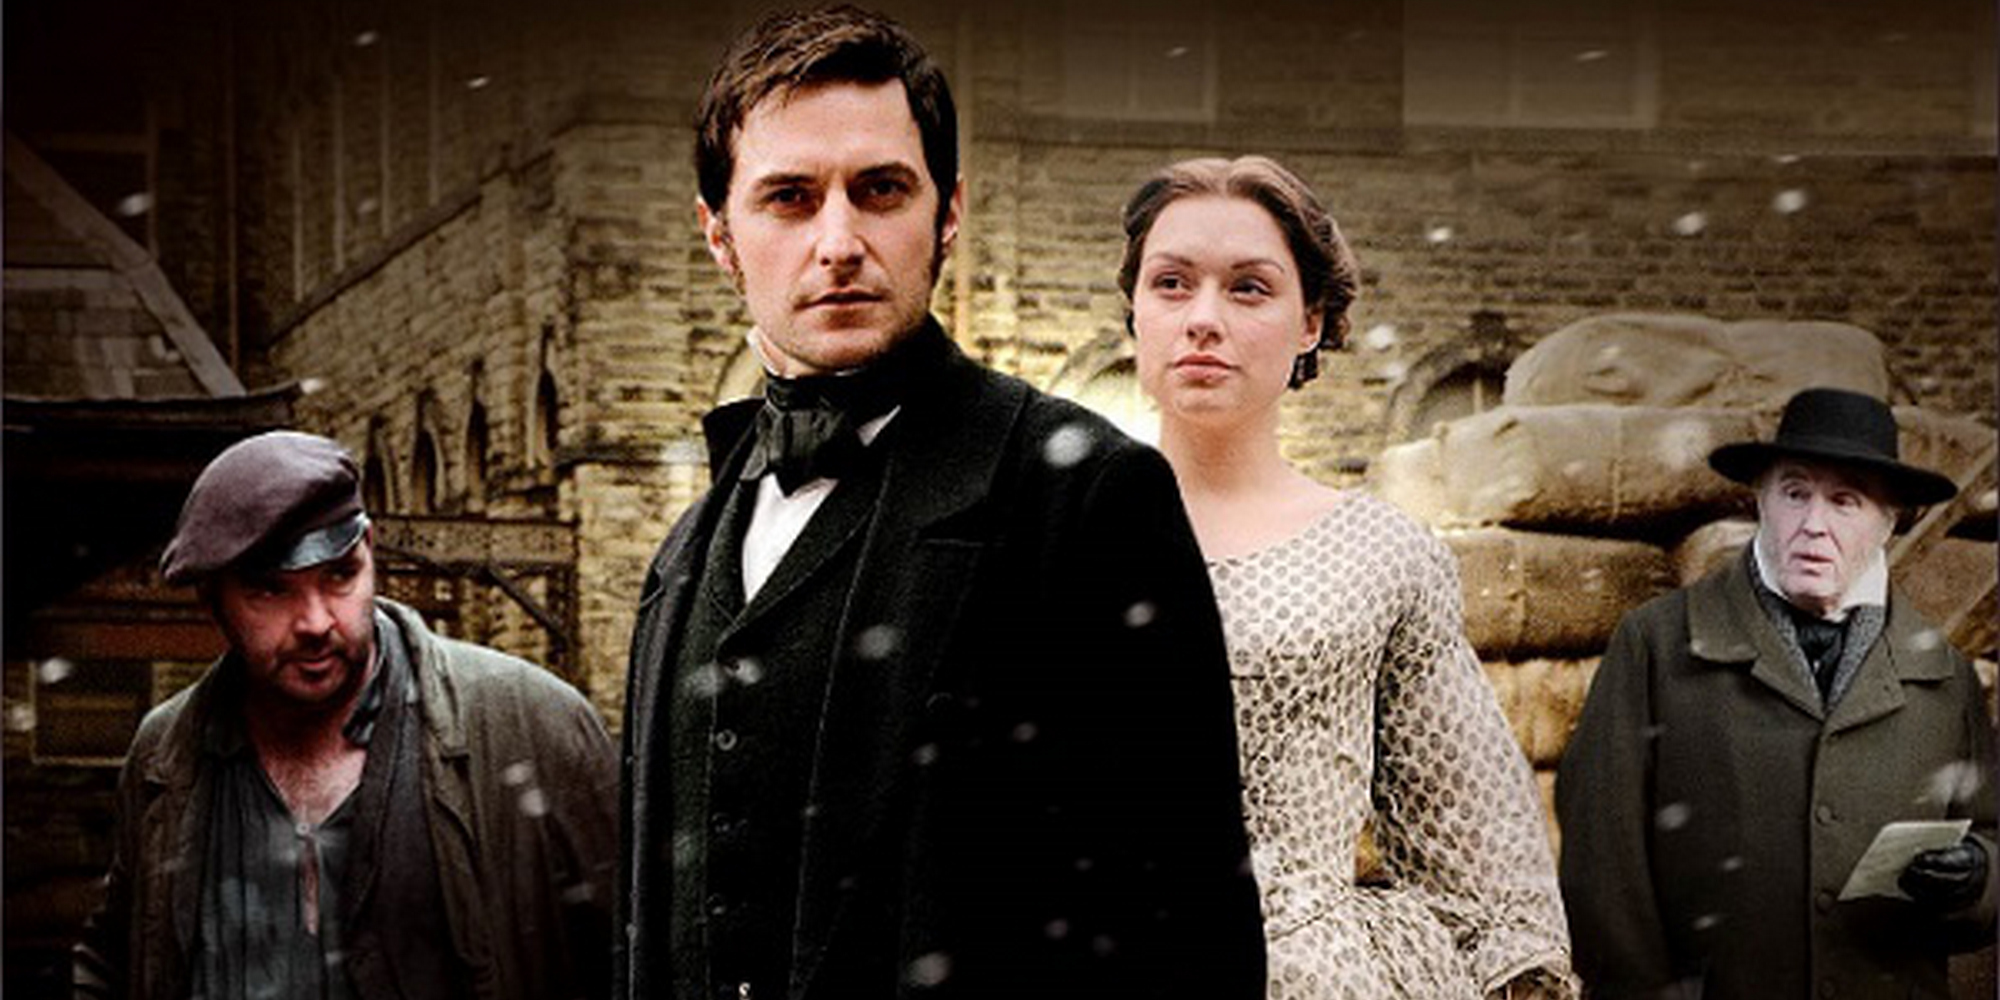 The cast of 'North and South'